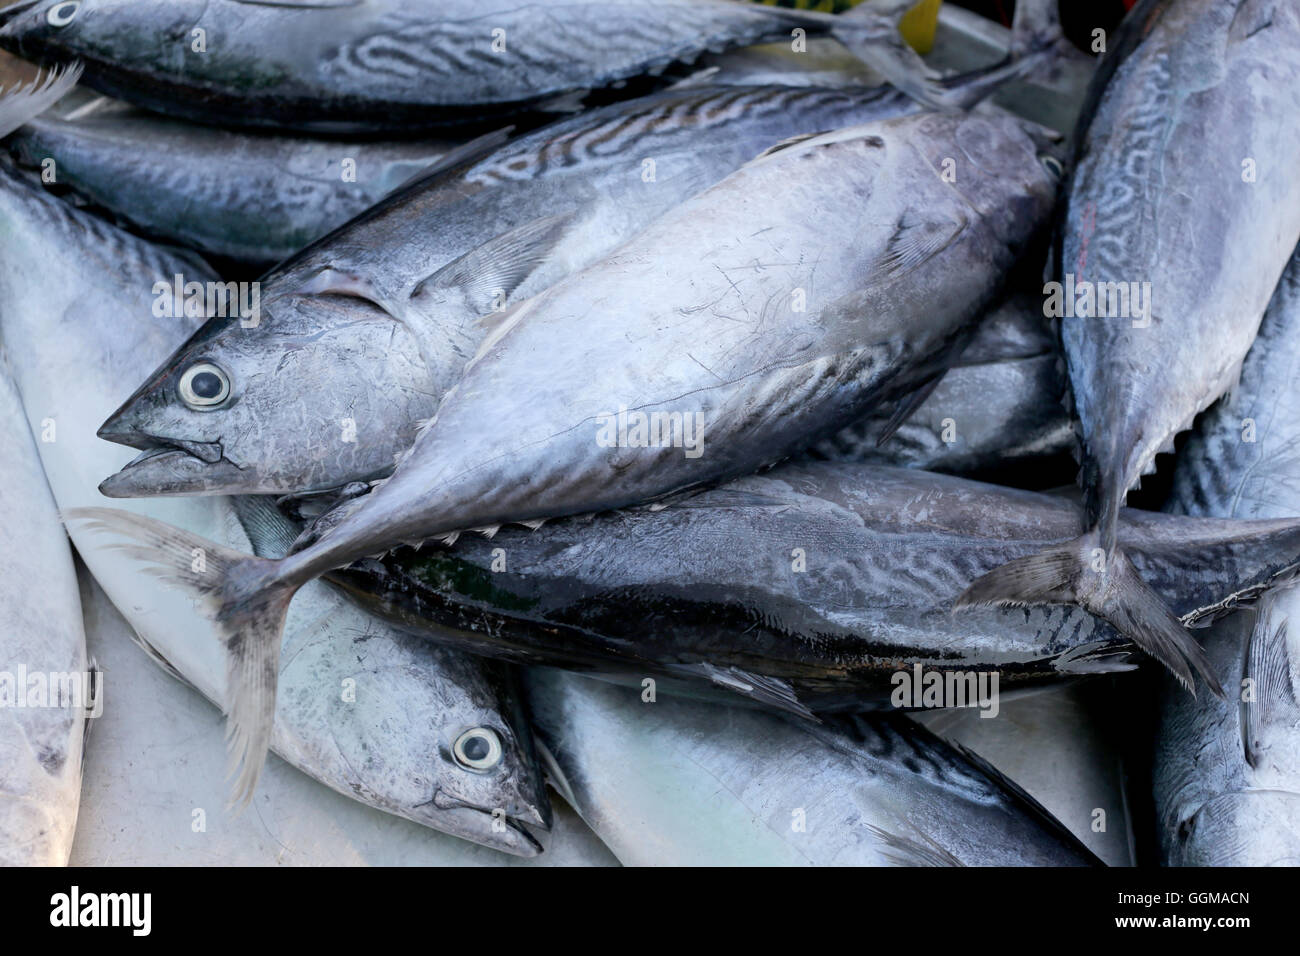 Longtail tuna or Northern bluefin tuna on the utensil for sell in the fish market. Stock Photo